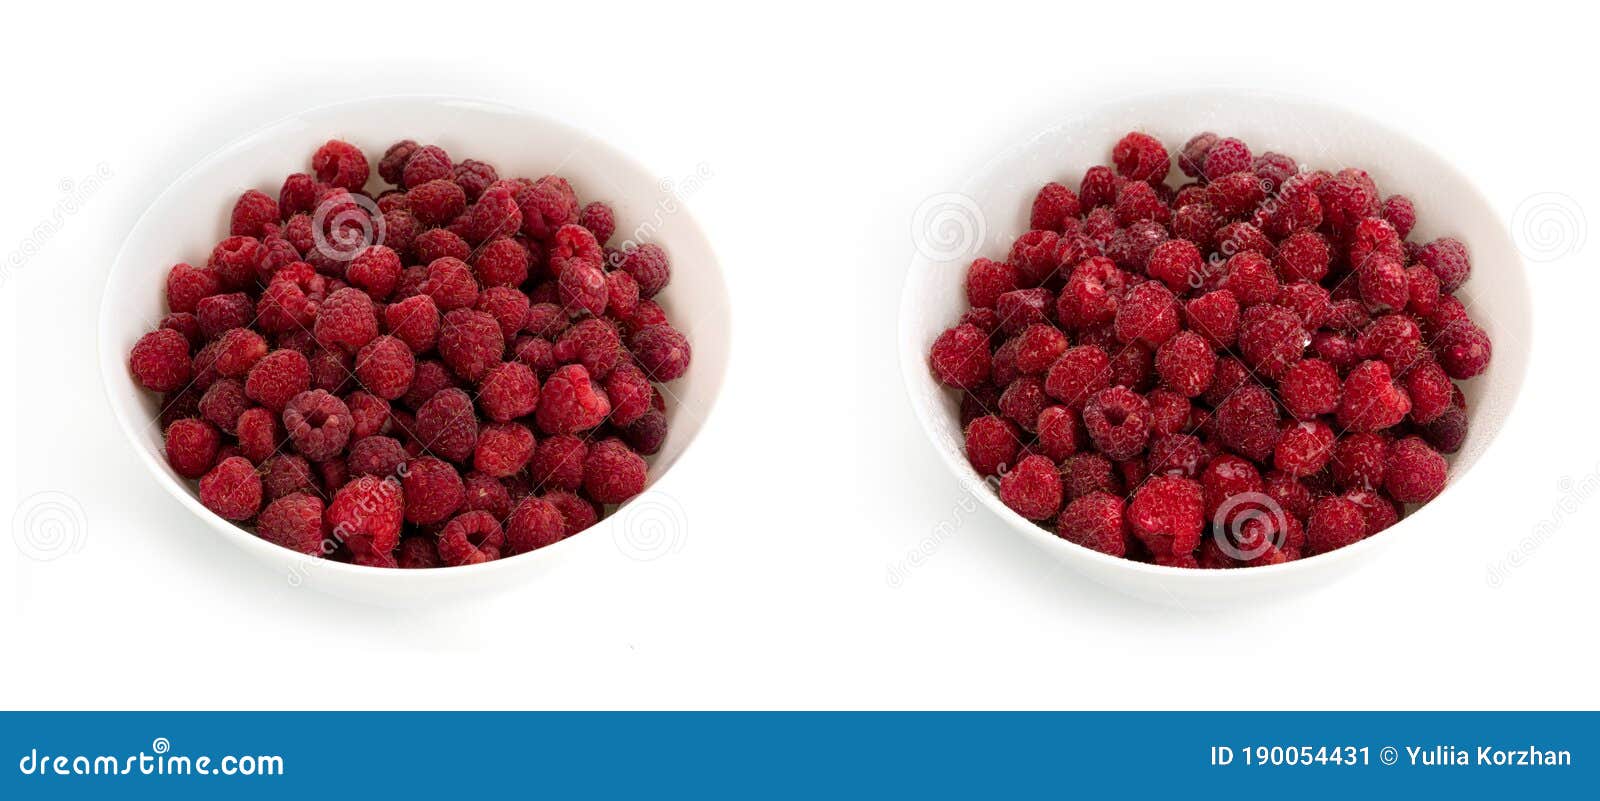 unwashed and washed raspberries in white deep plates on a white background.